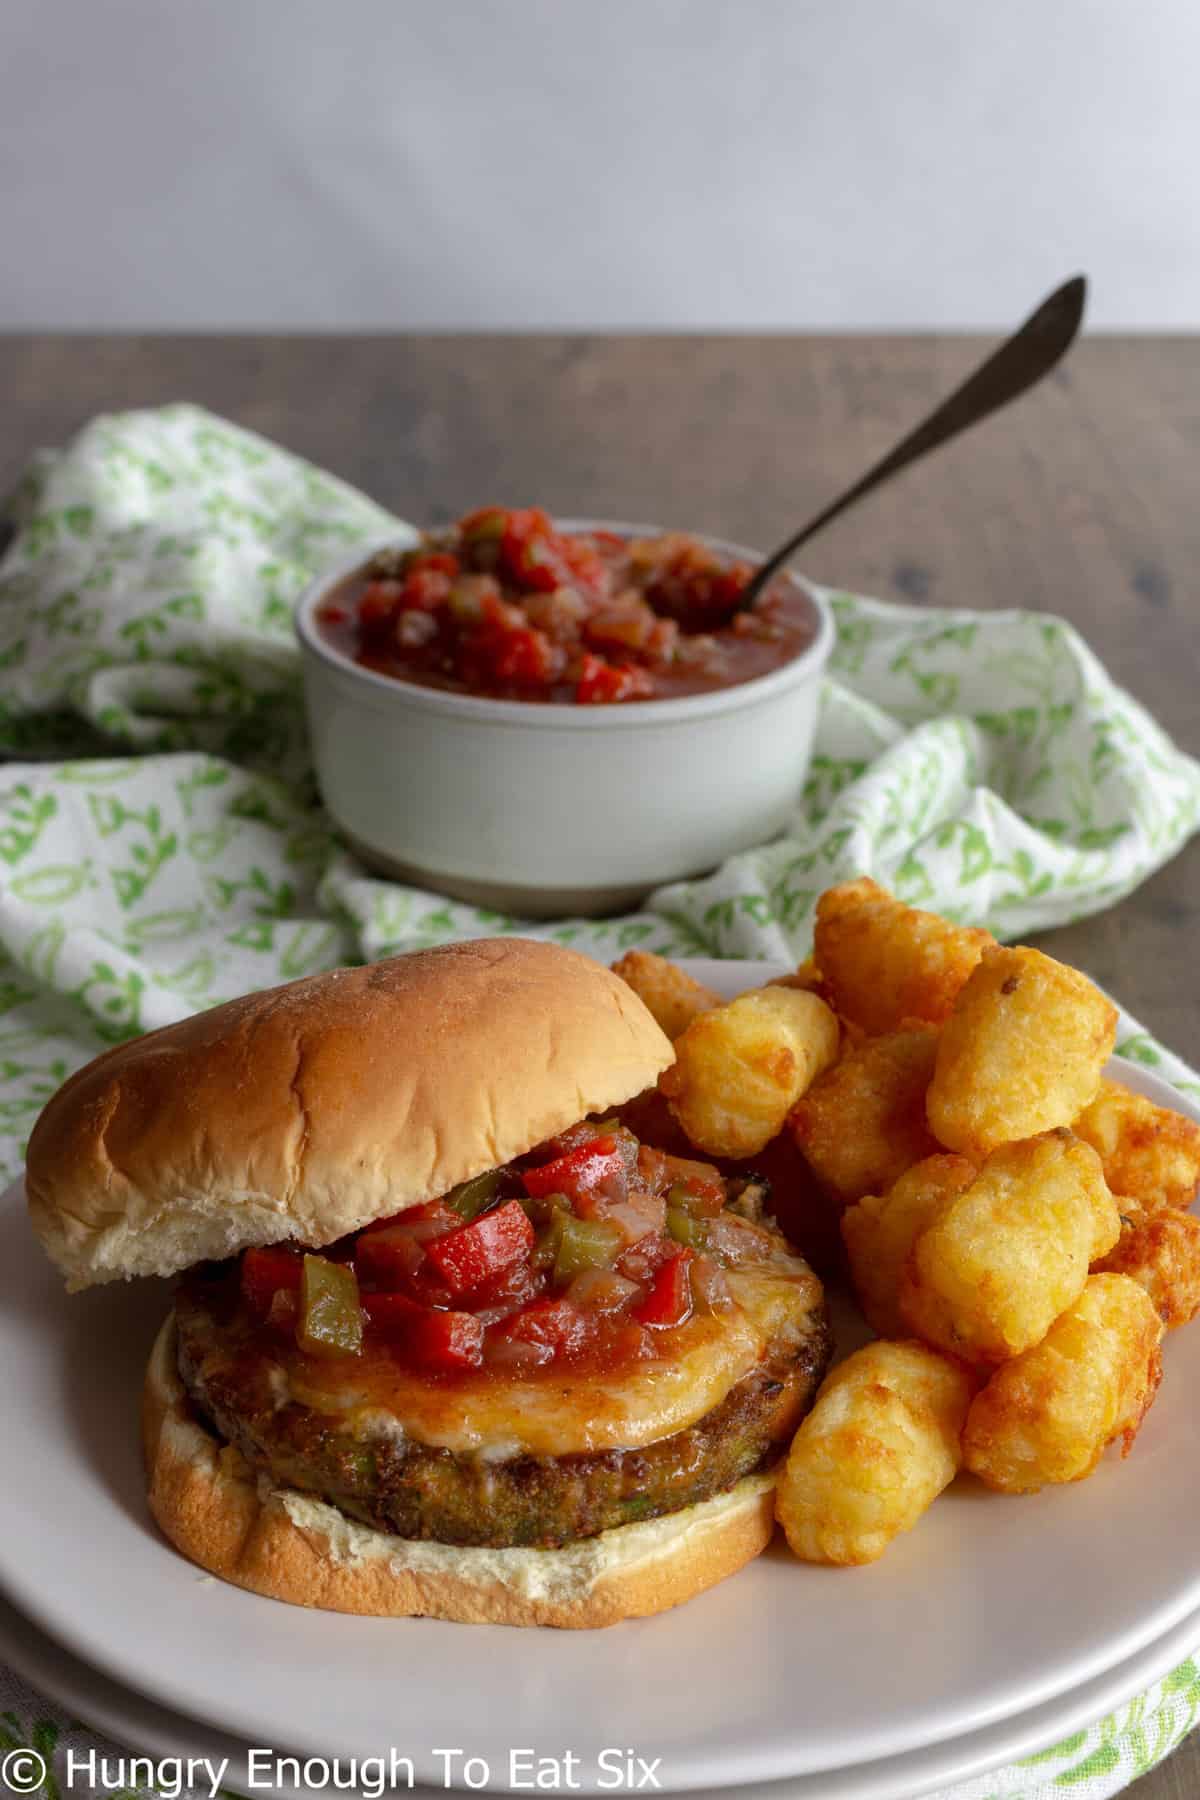 Burger spread with chilli sauce with tater tots.